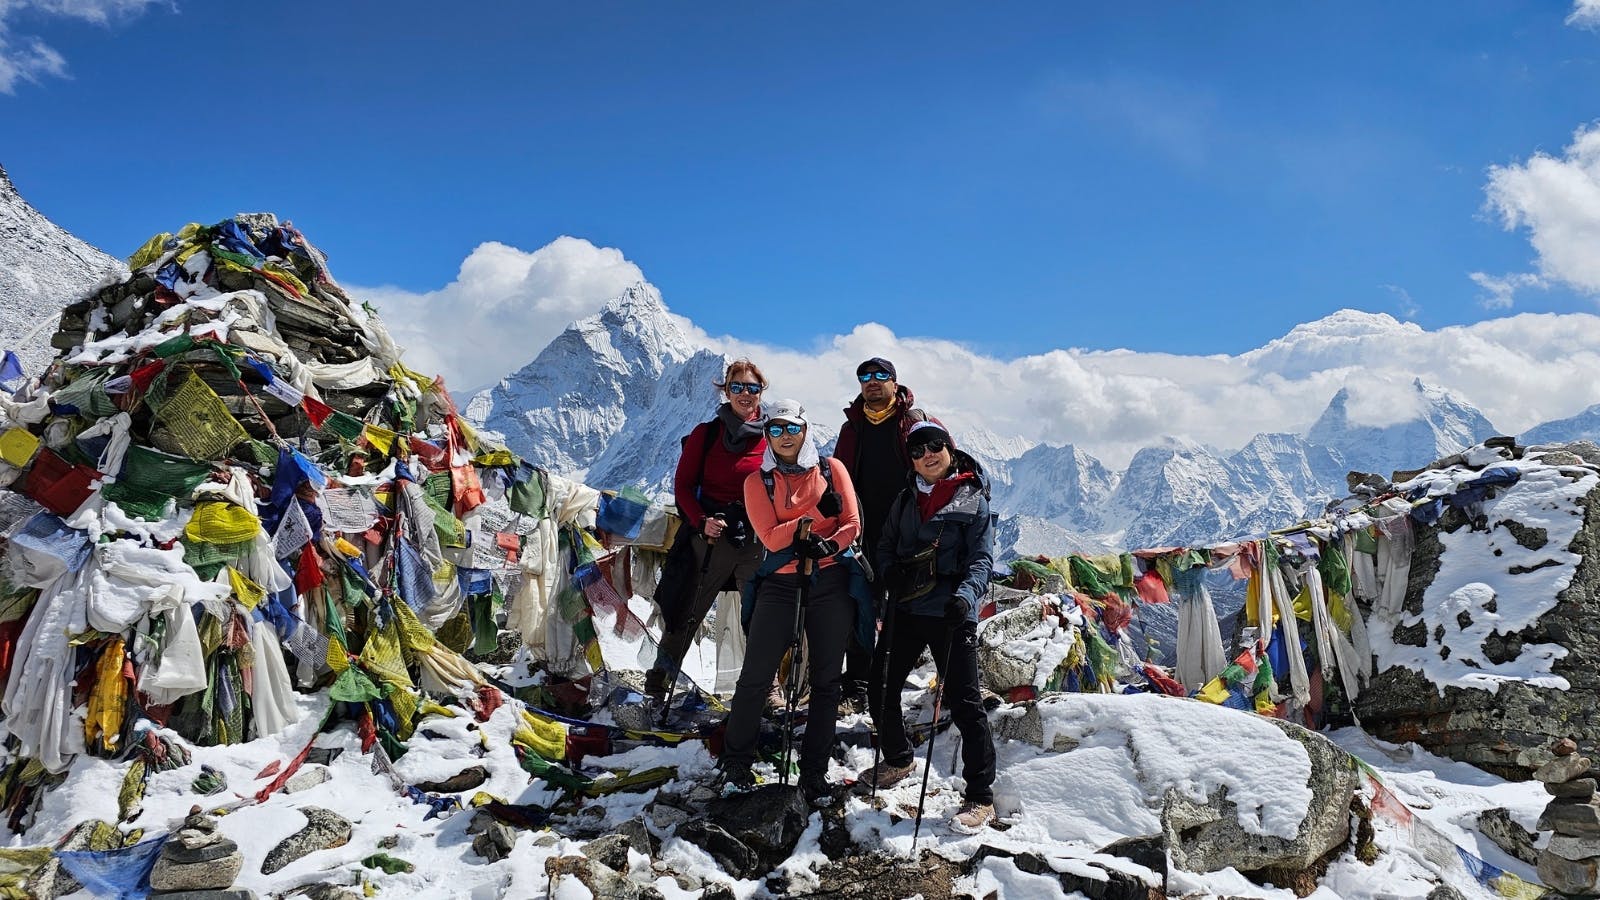 hukla Pass offers stunning views of the surrounding mountains, including Mount Everest, Lhotse, and Ama Dablam.